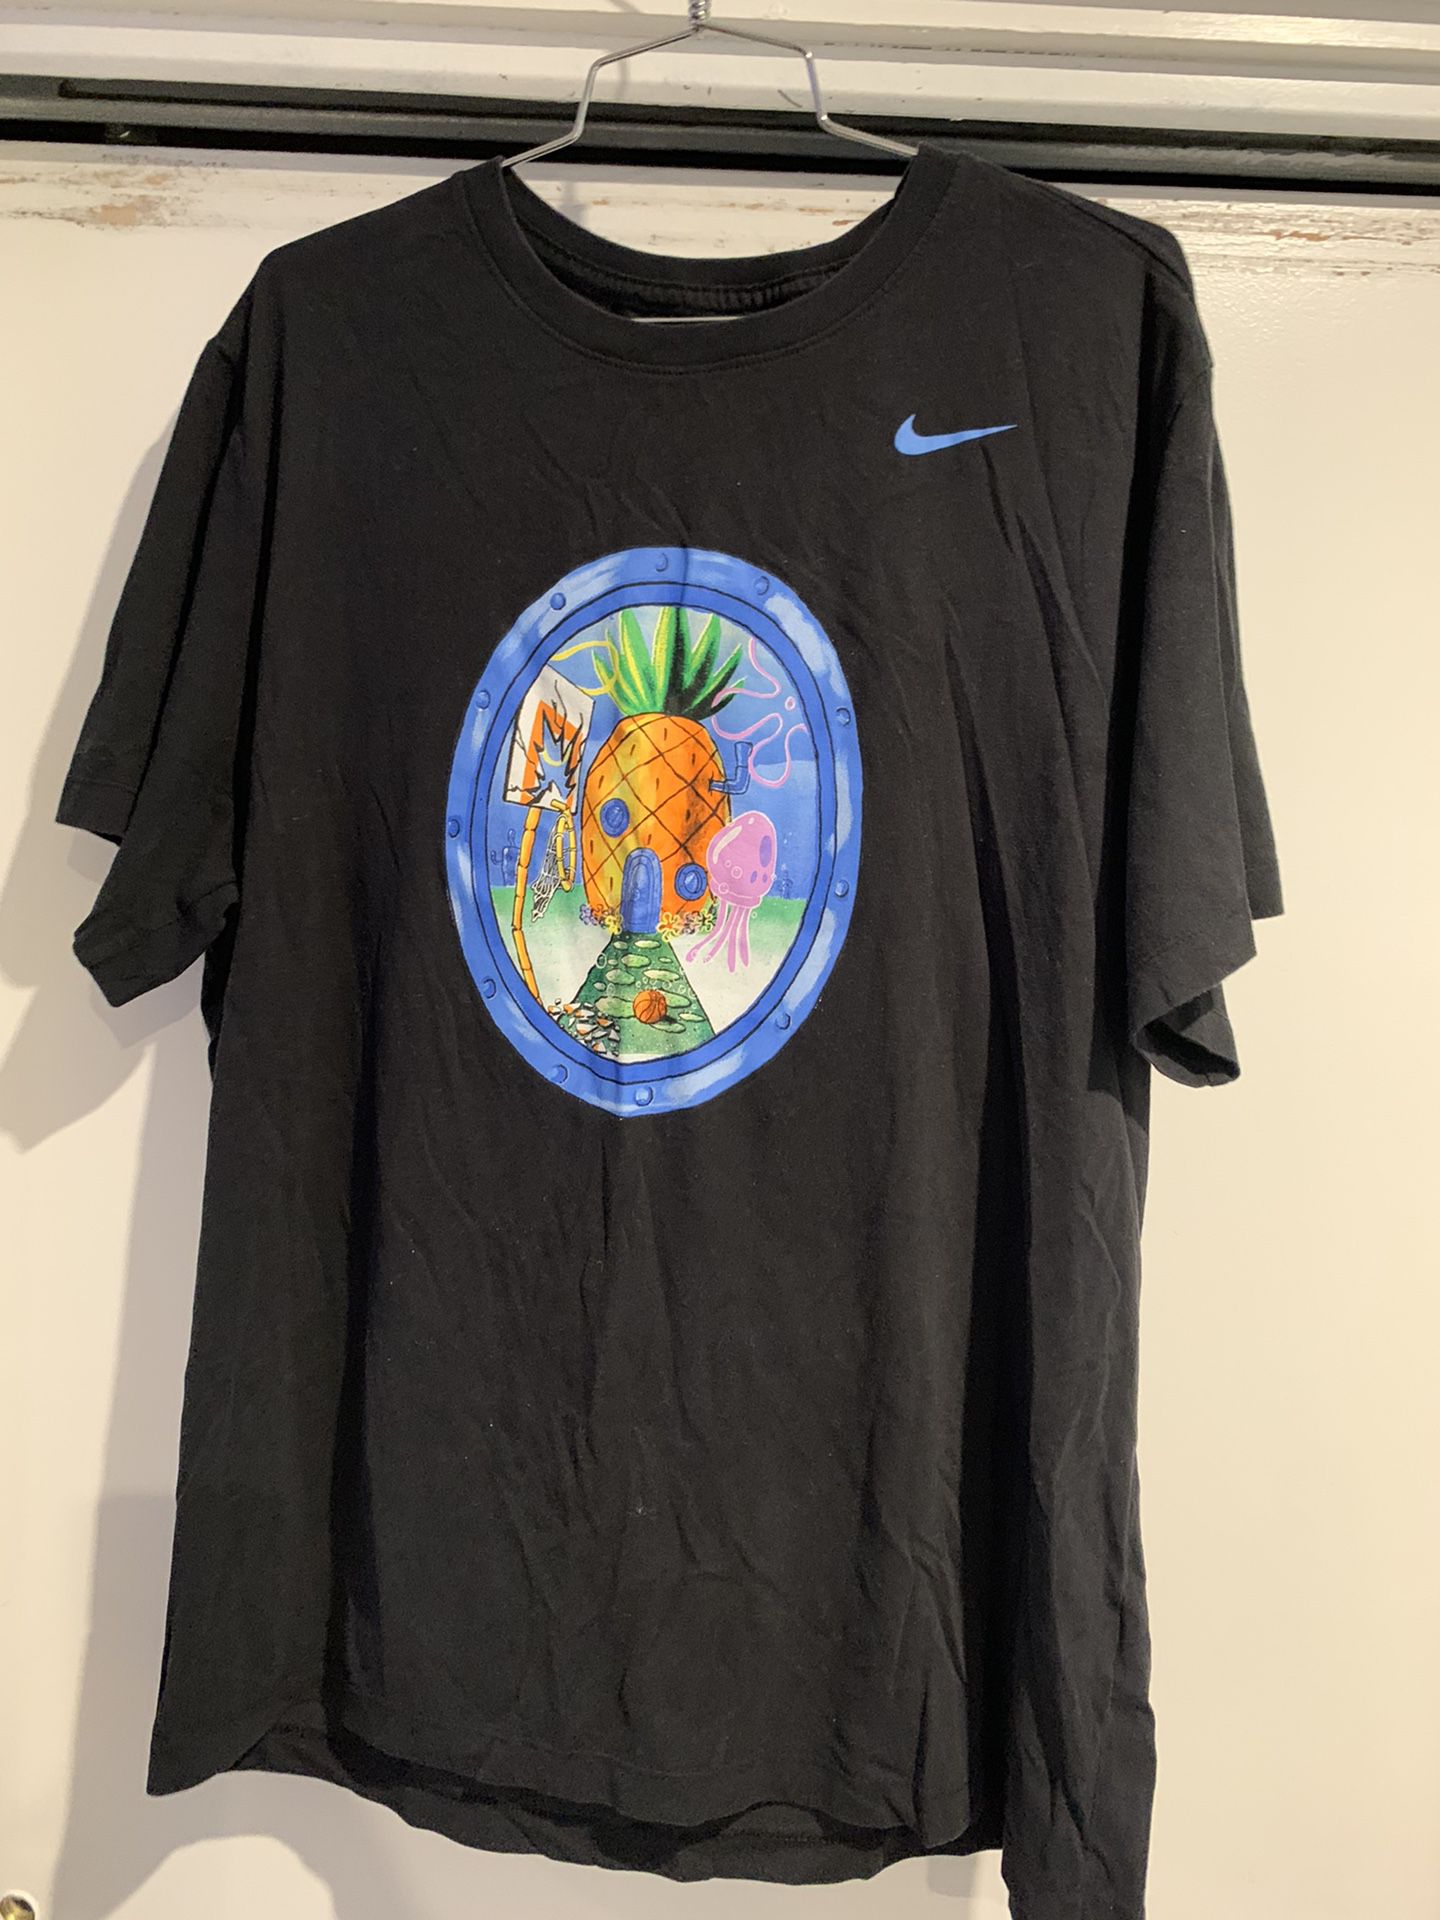 Kyrie Irving Spongebob Nike Dri Fit T Shirt for Sale in Downey, - OfferUp